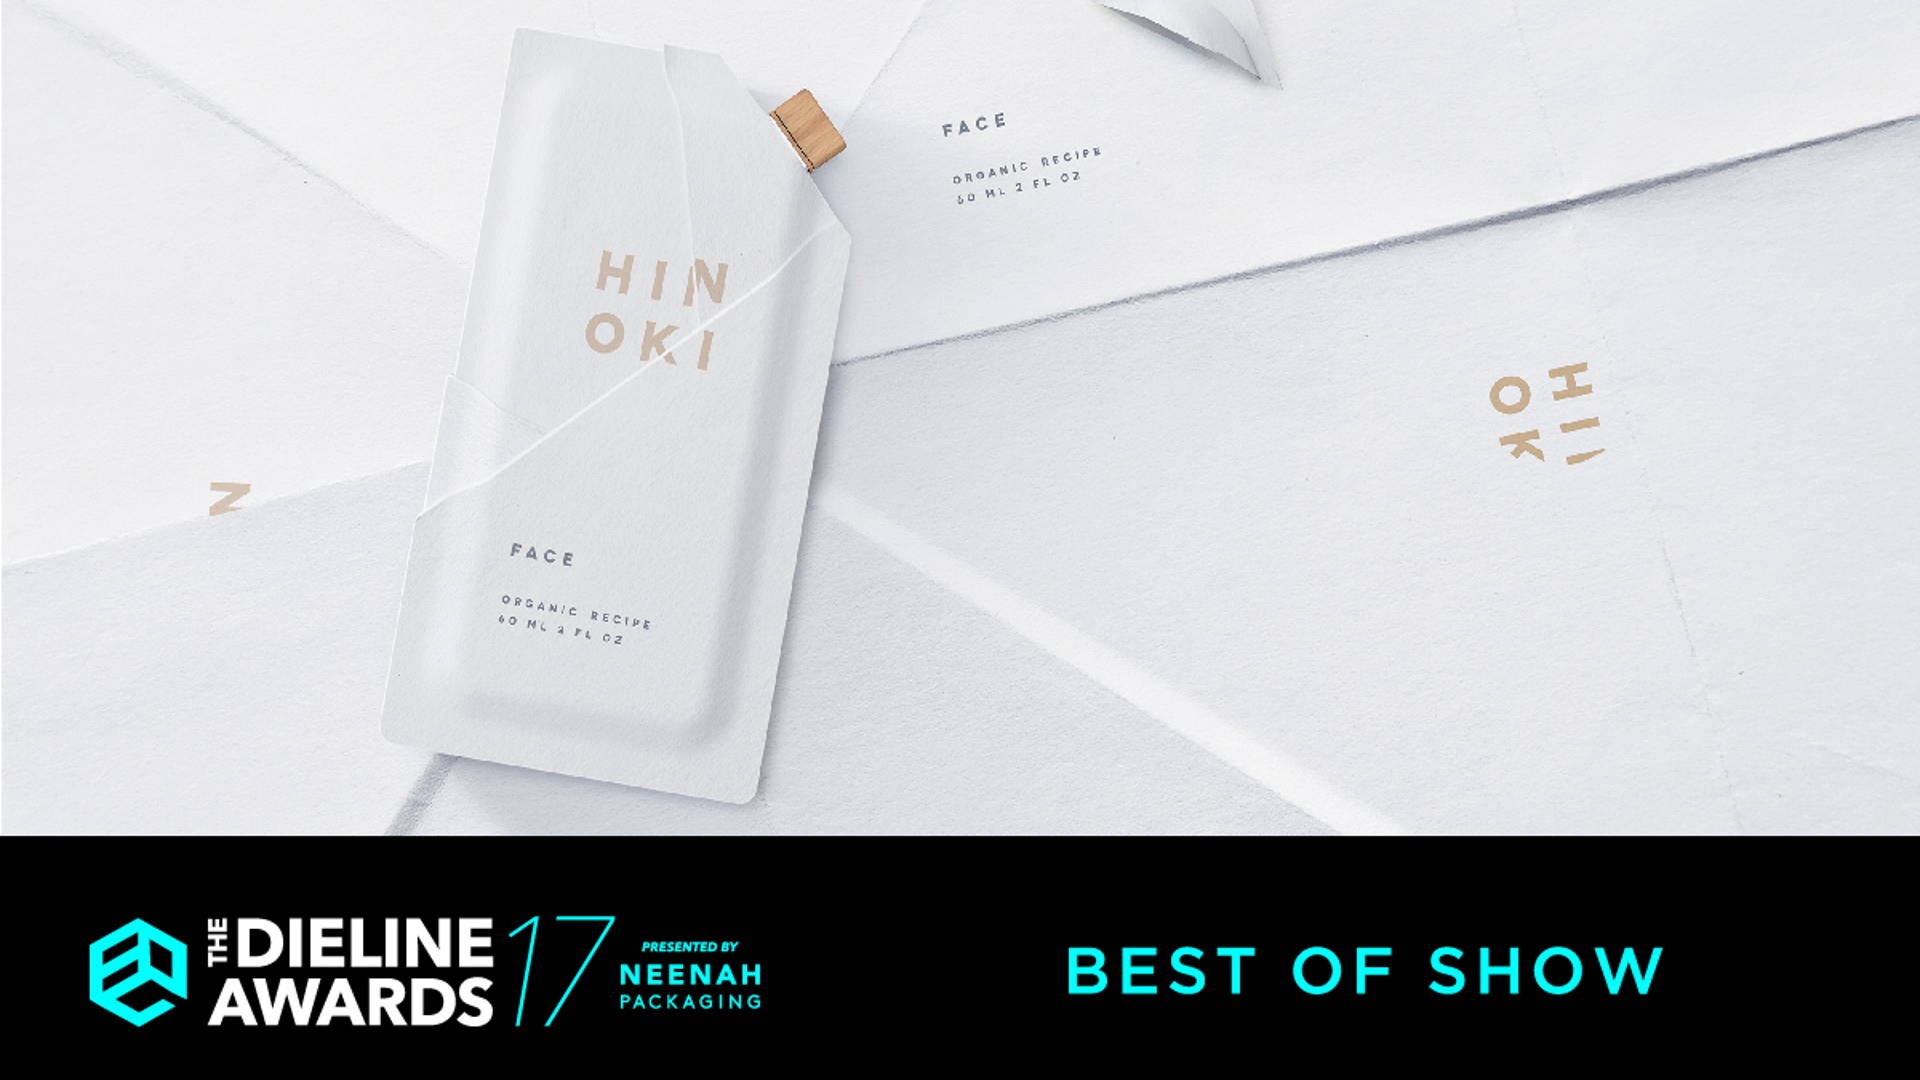 Featured image for The Dieline Awards 2017: Hinoki